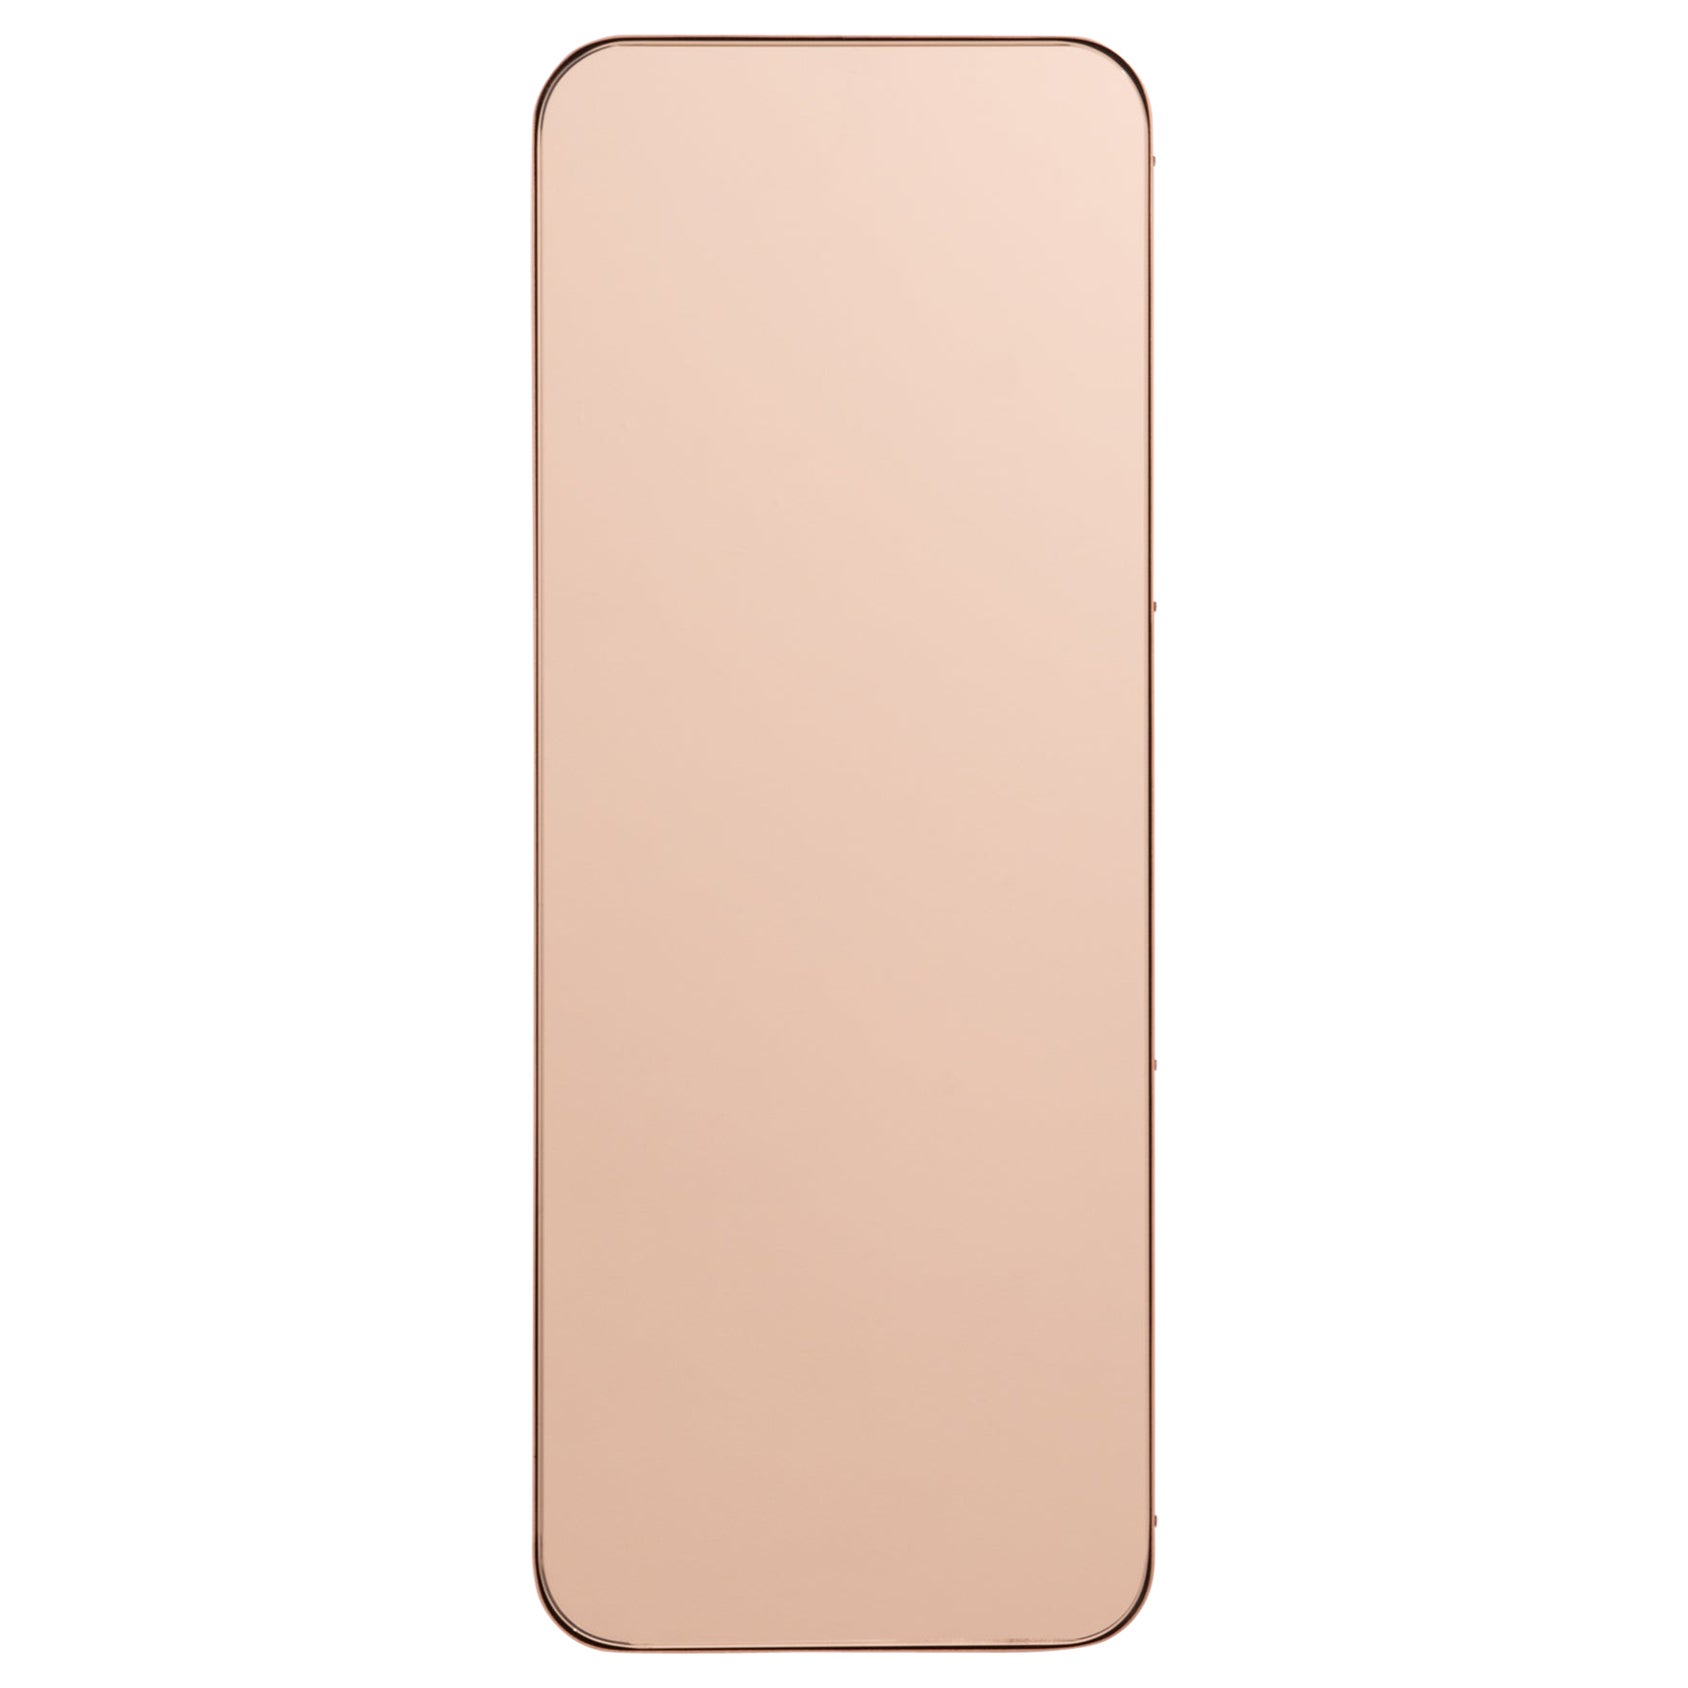 Quadris Rectangular Rose Gold Contemporary Mirror with a Copper Frame, Large For Sale